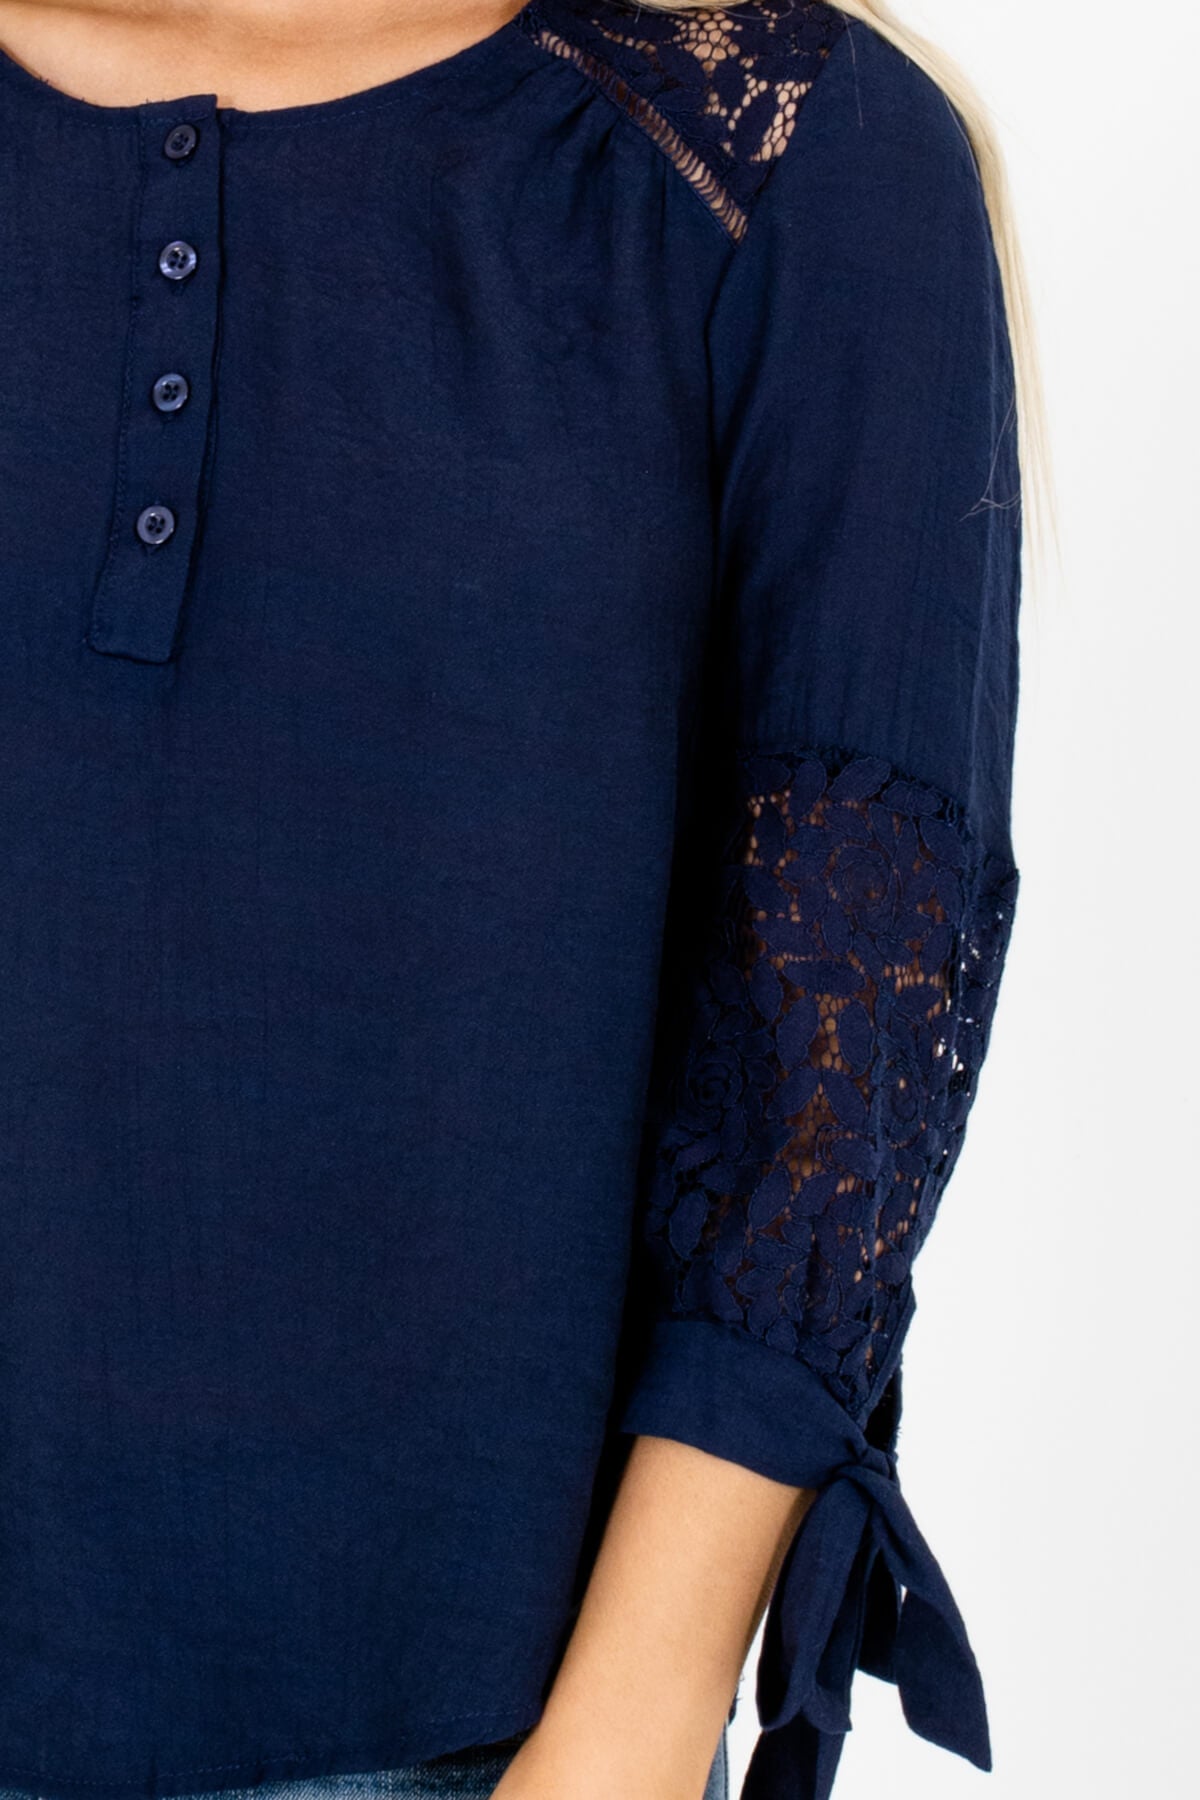 Navy Blue Crochet Lace Accent 3/4 Sleeve Tops for Women